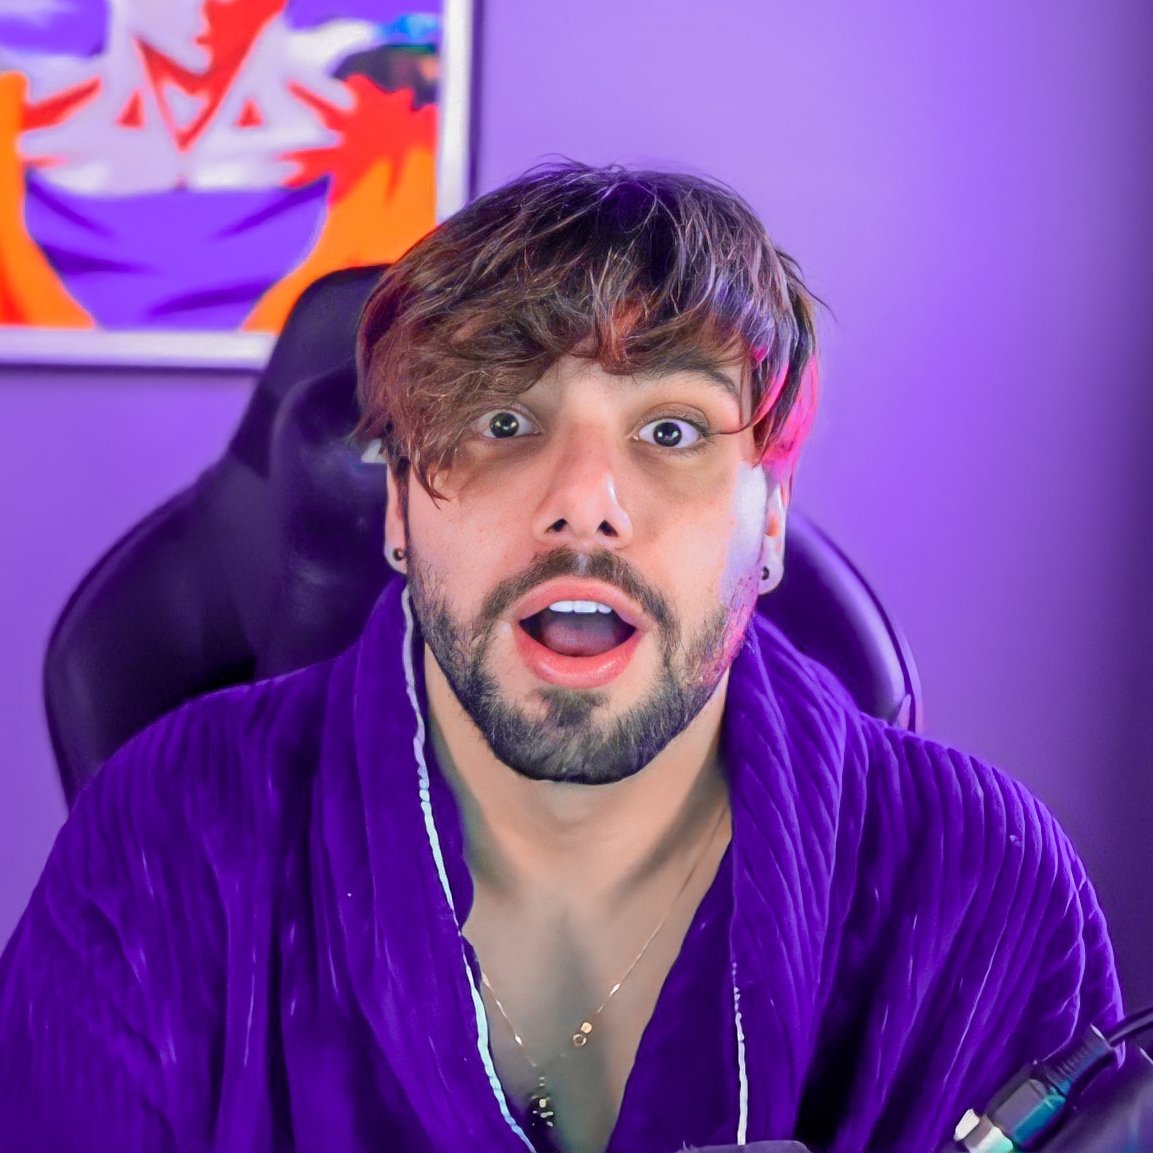 T3ddy Colors on X: eles💜  / X